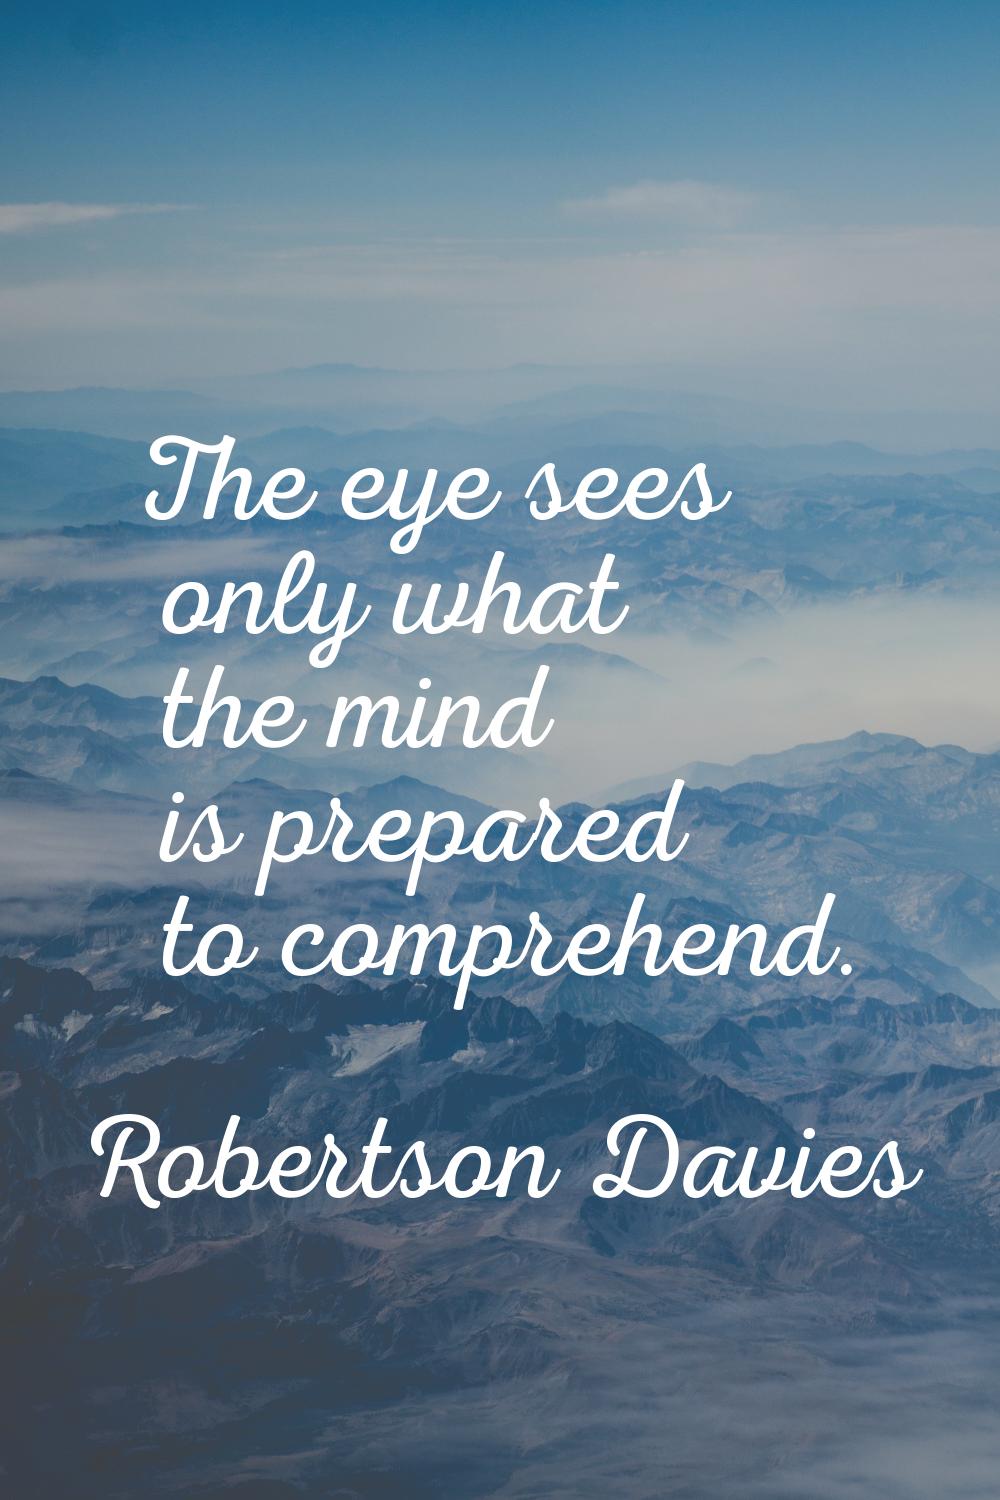 The eye sees only what the mind is prepared to comprehend.